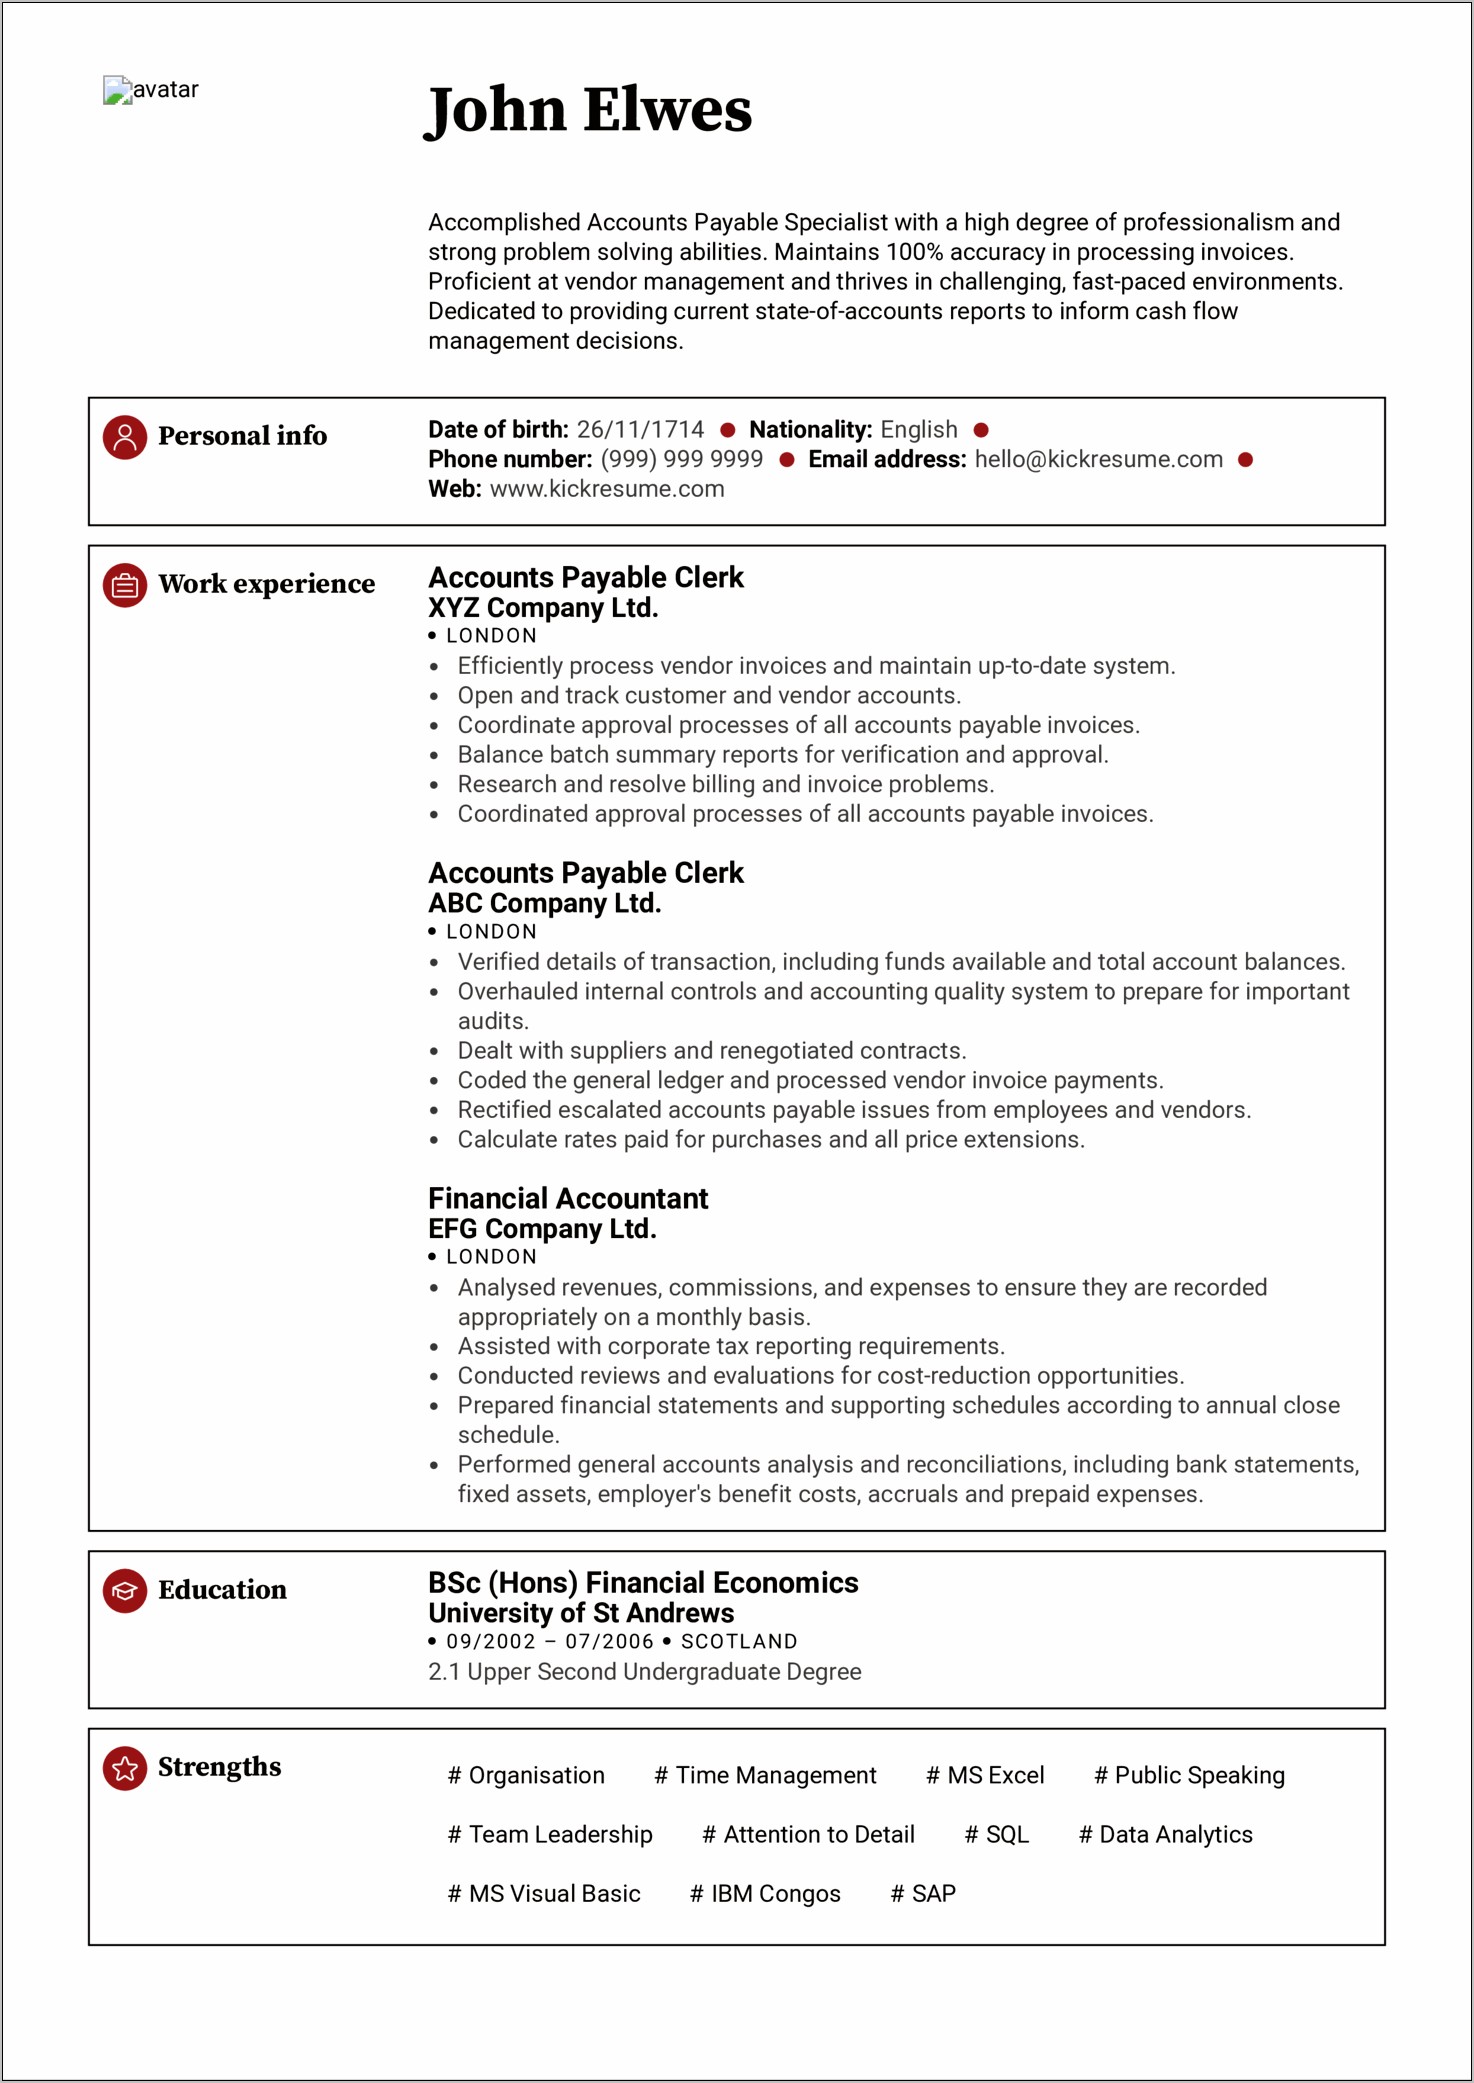 Samples Of Accounting Manager Resumes